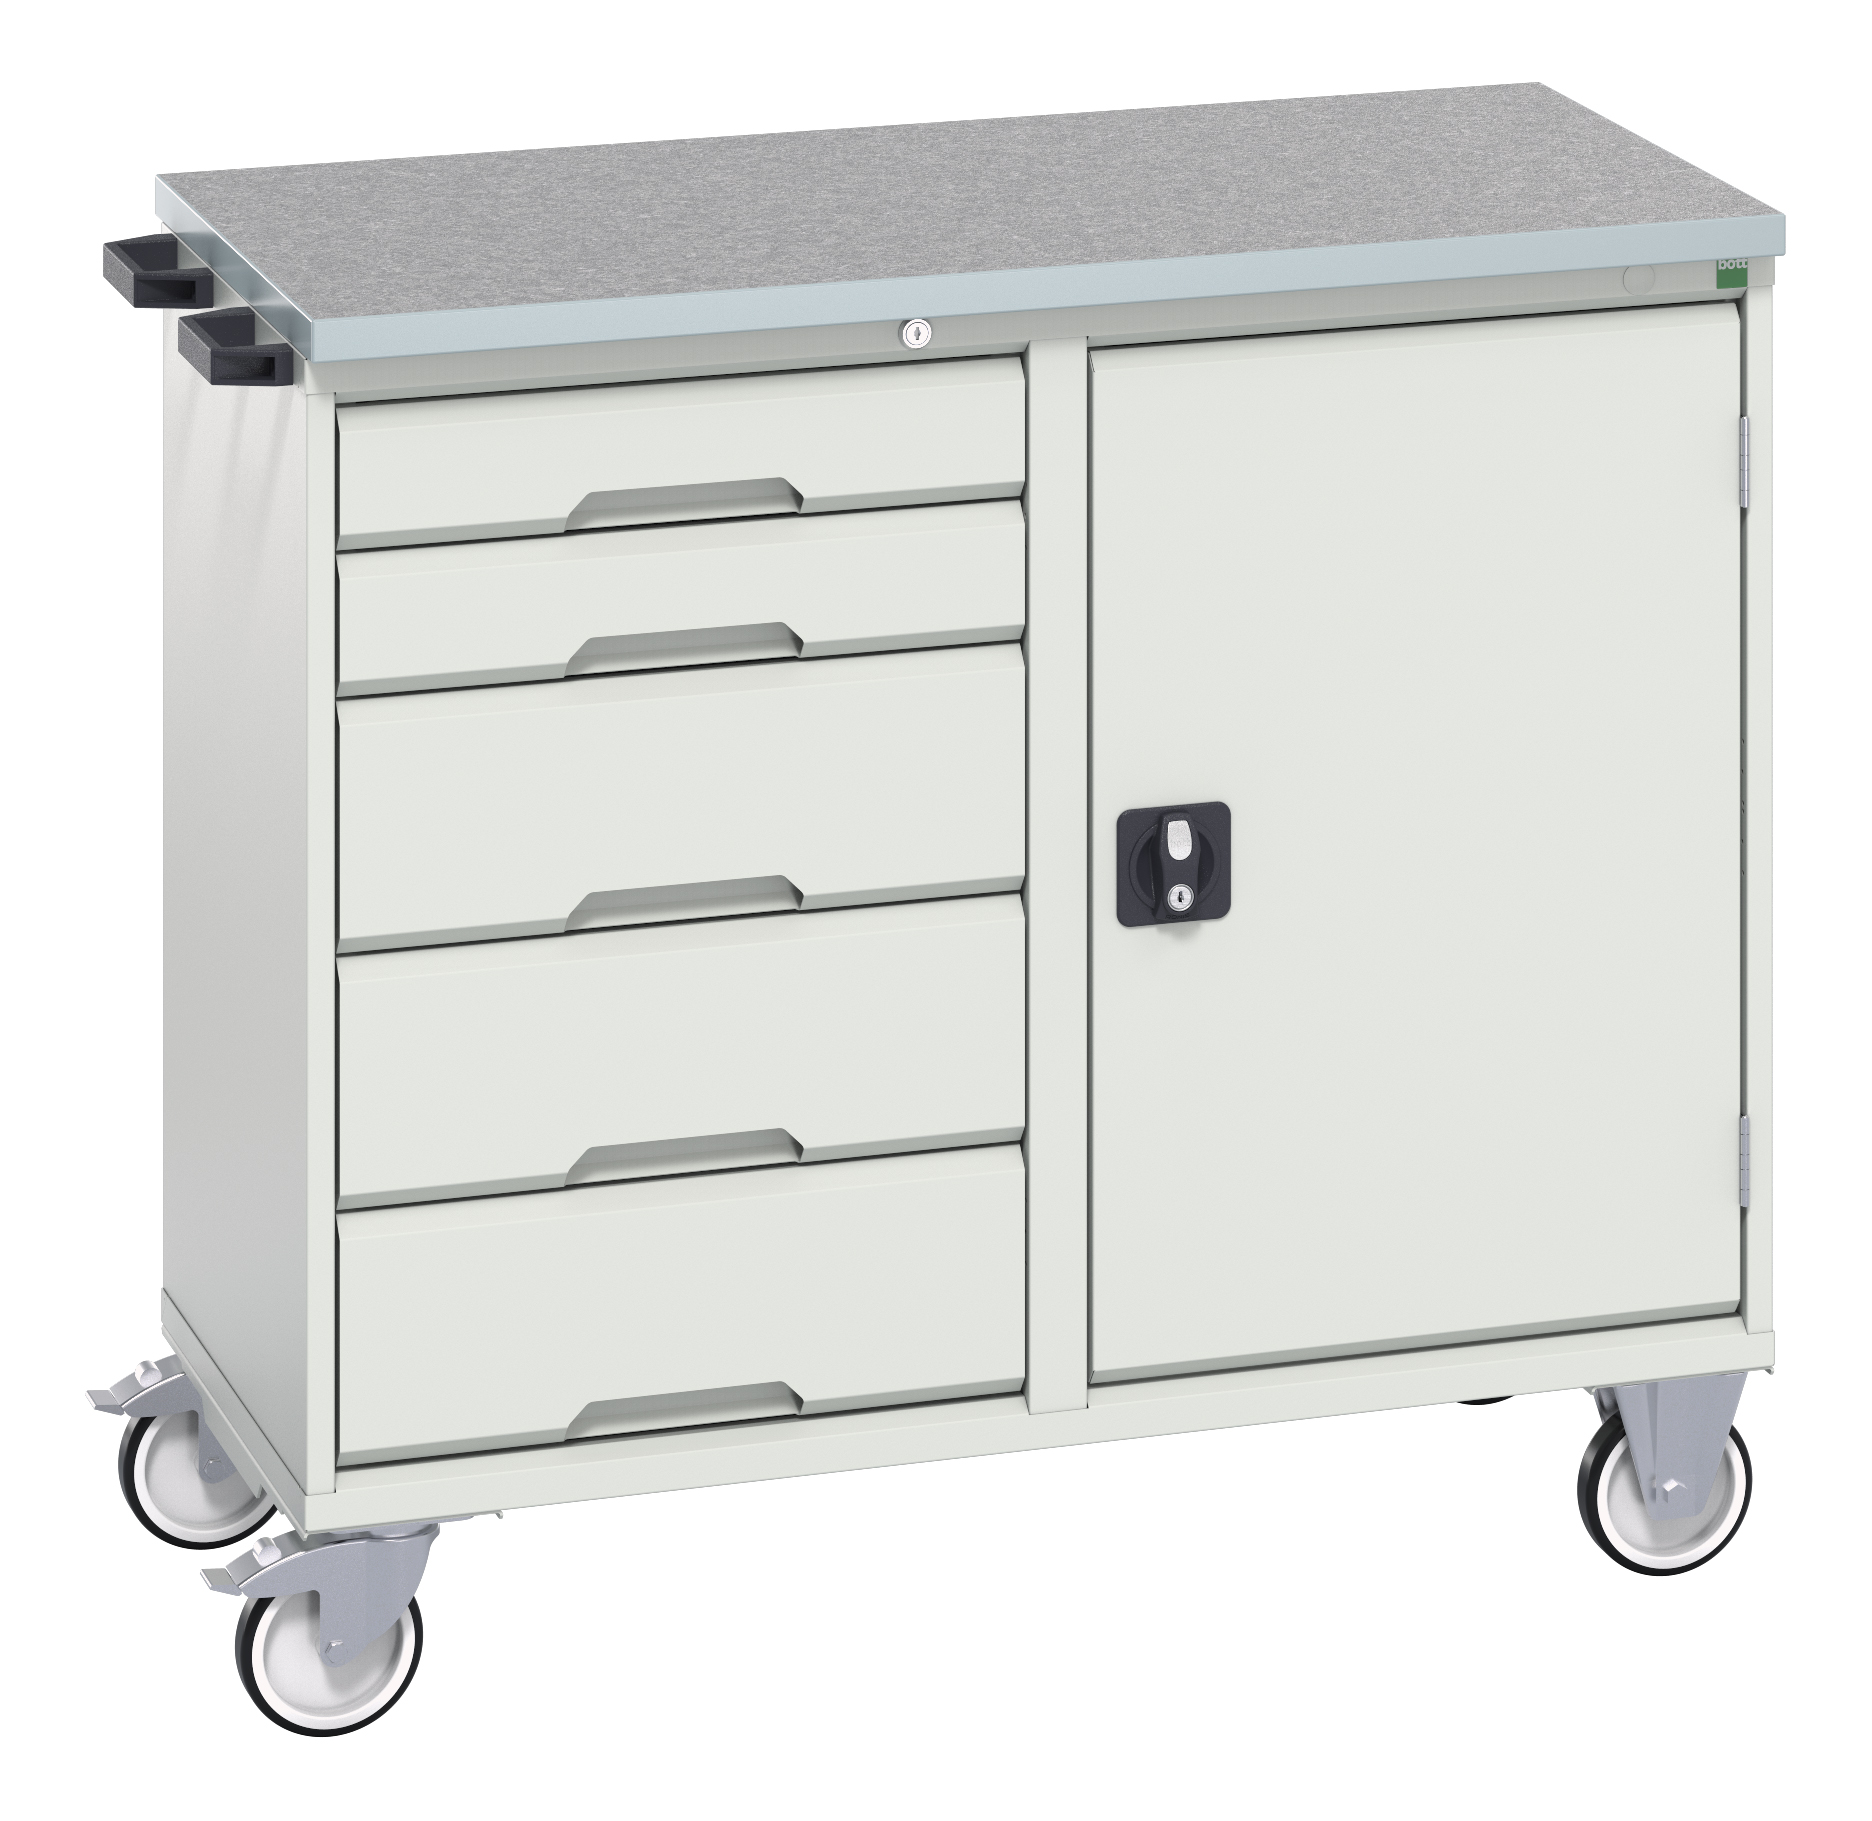 Bott Verso Maintenance Trolley With 5 Drawers / Cupboard & Lino Top - 16927120.16